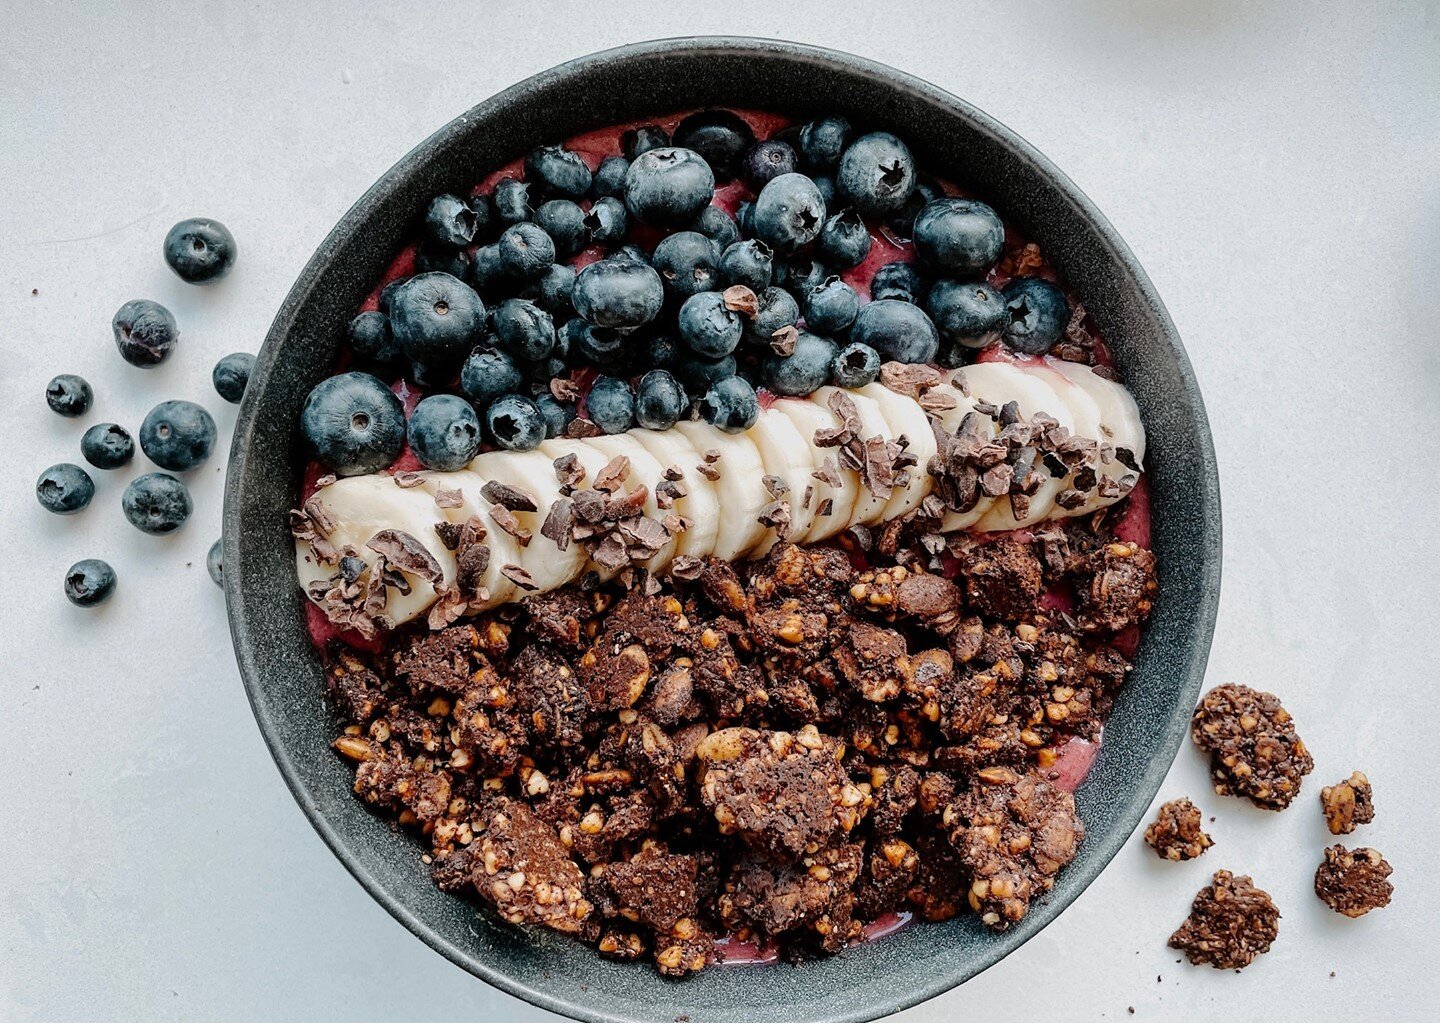 Eyes on the prize 👀 Our PITAYA BOWL is blended with fresh pink dragonfruit, strawberries oranges and sunflower seed butter; topped with our homemade seed-packed chocolate cereal, blueberries, bananas, and cacao nibs! A healthy and refreshing way to 